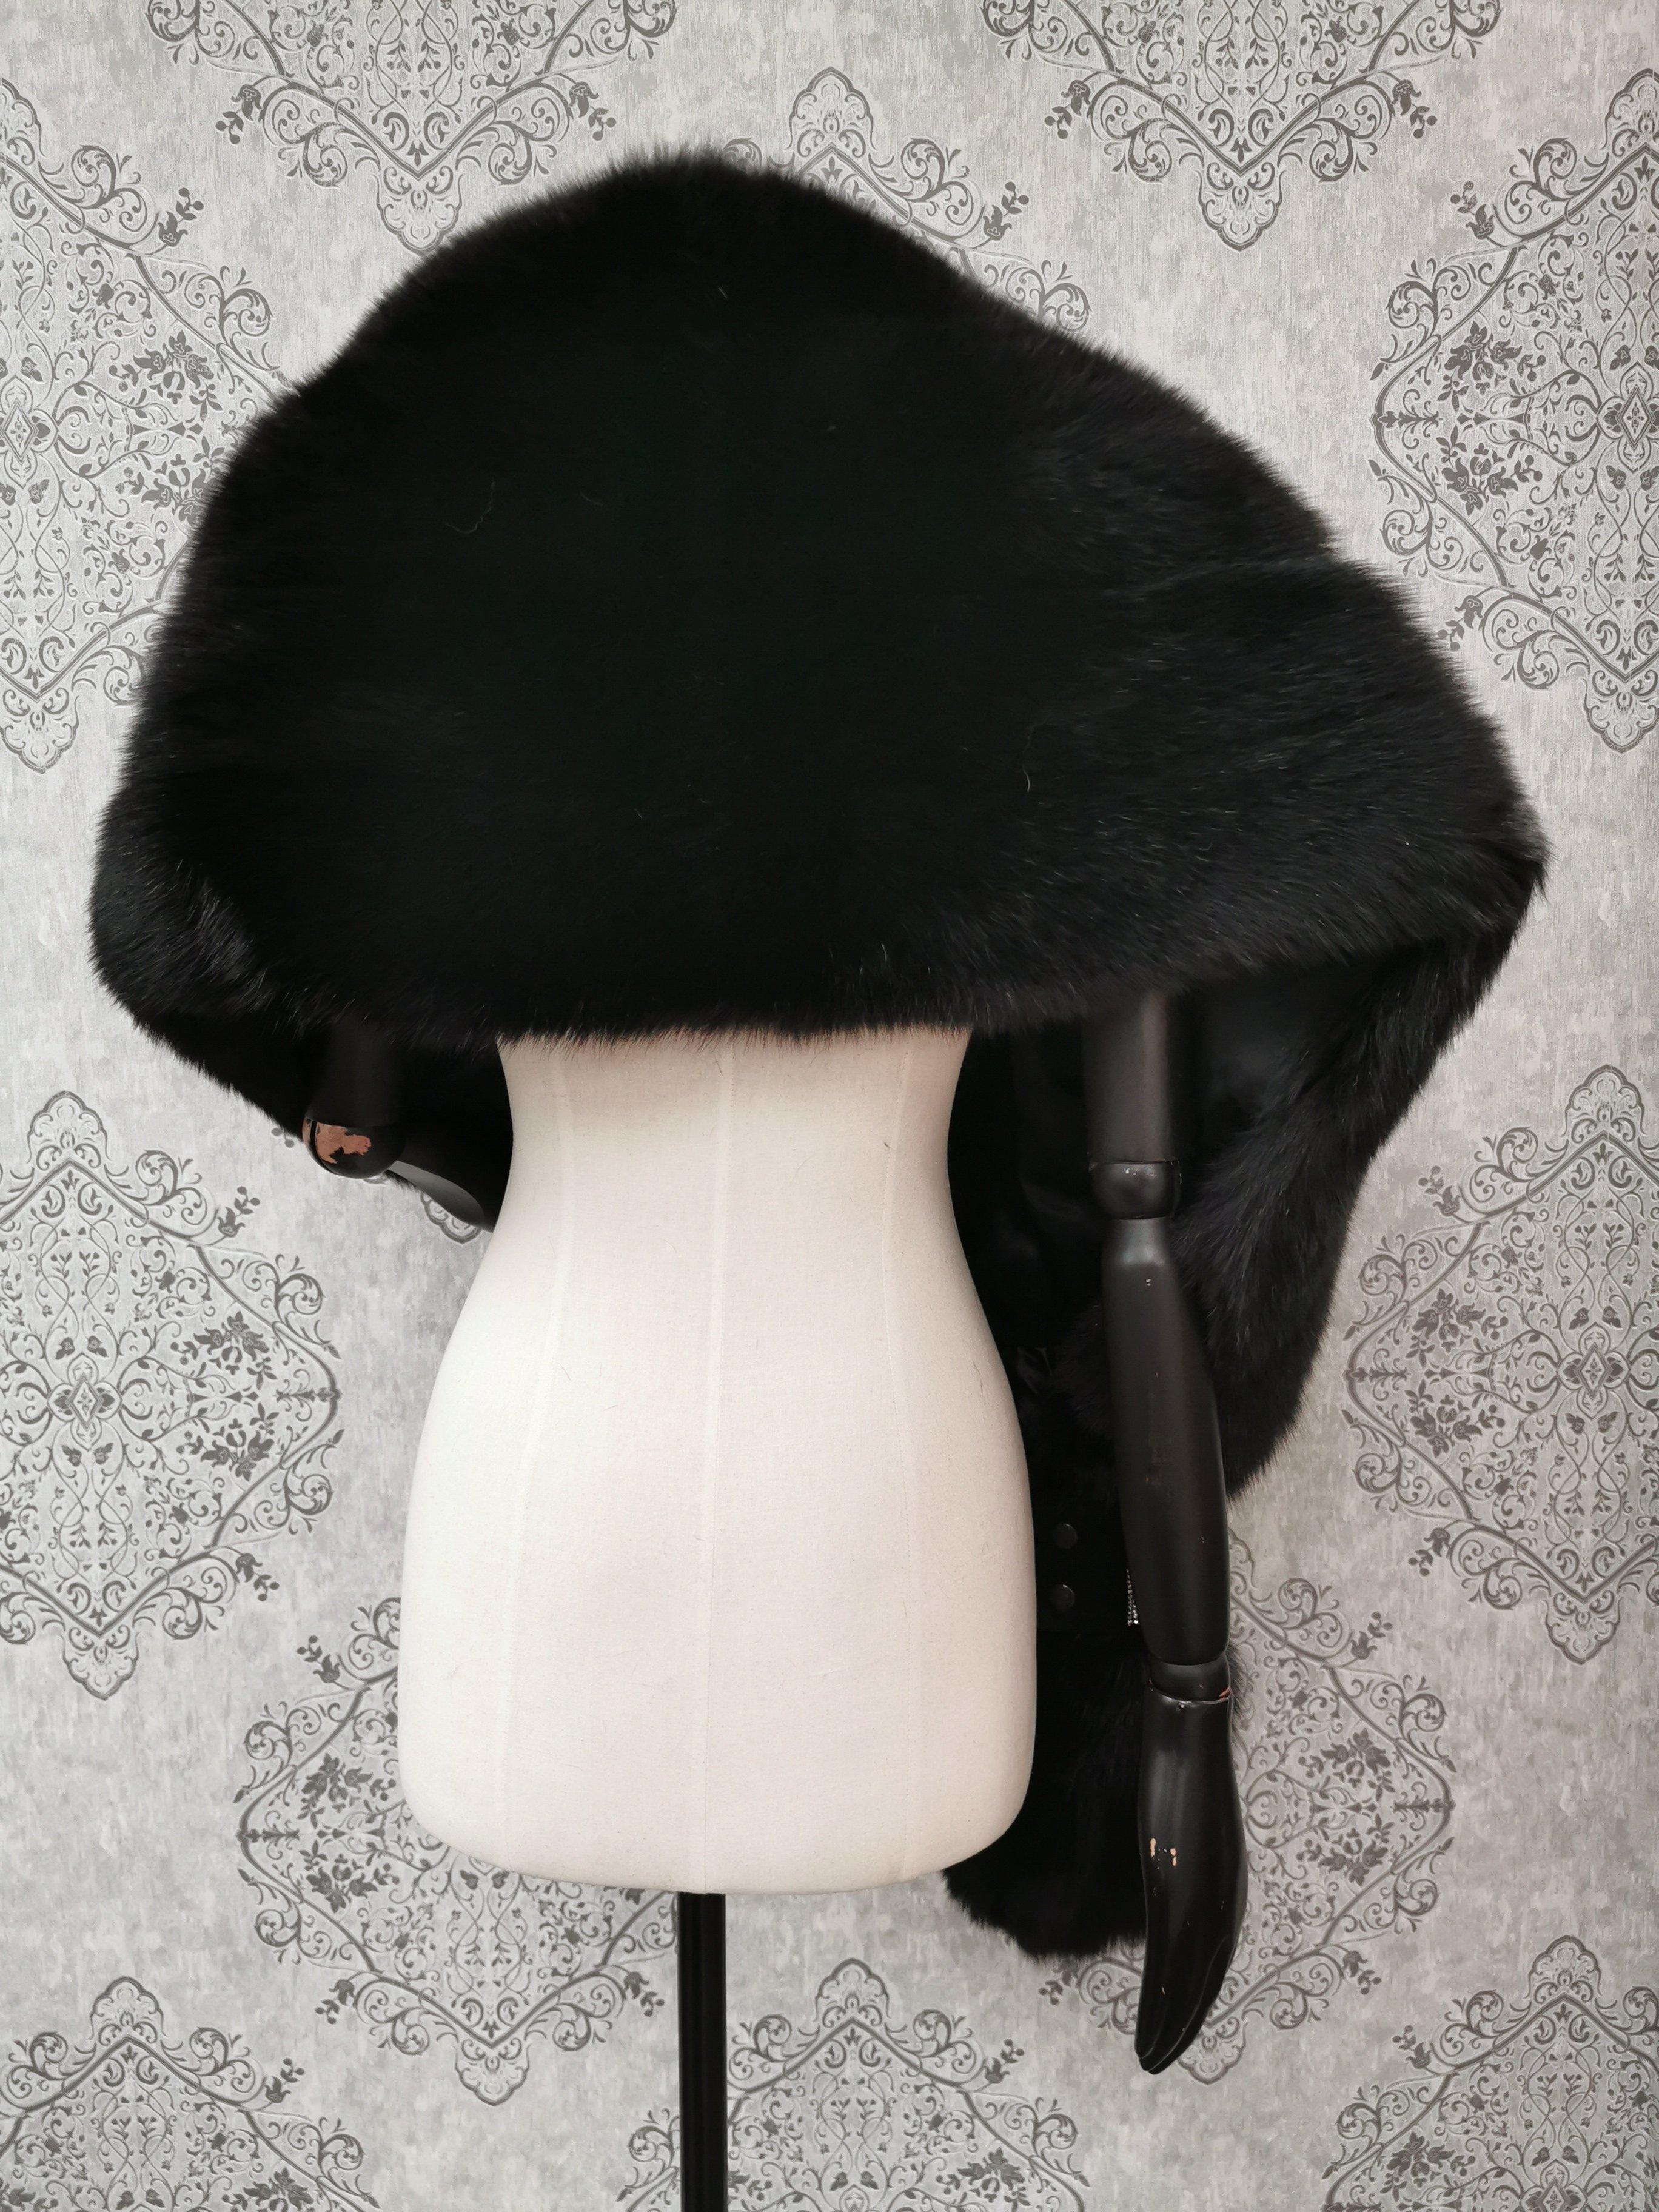 Brand New Holt Renfrew Fox Fur Cape Shrug Stole  In New Condition For Sale In Montreal, Quebec